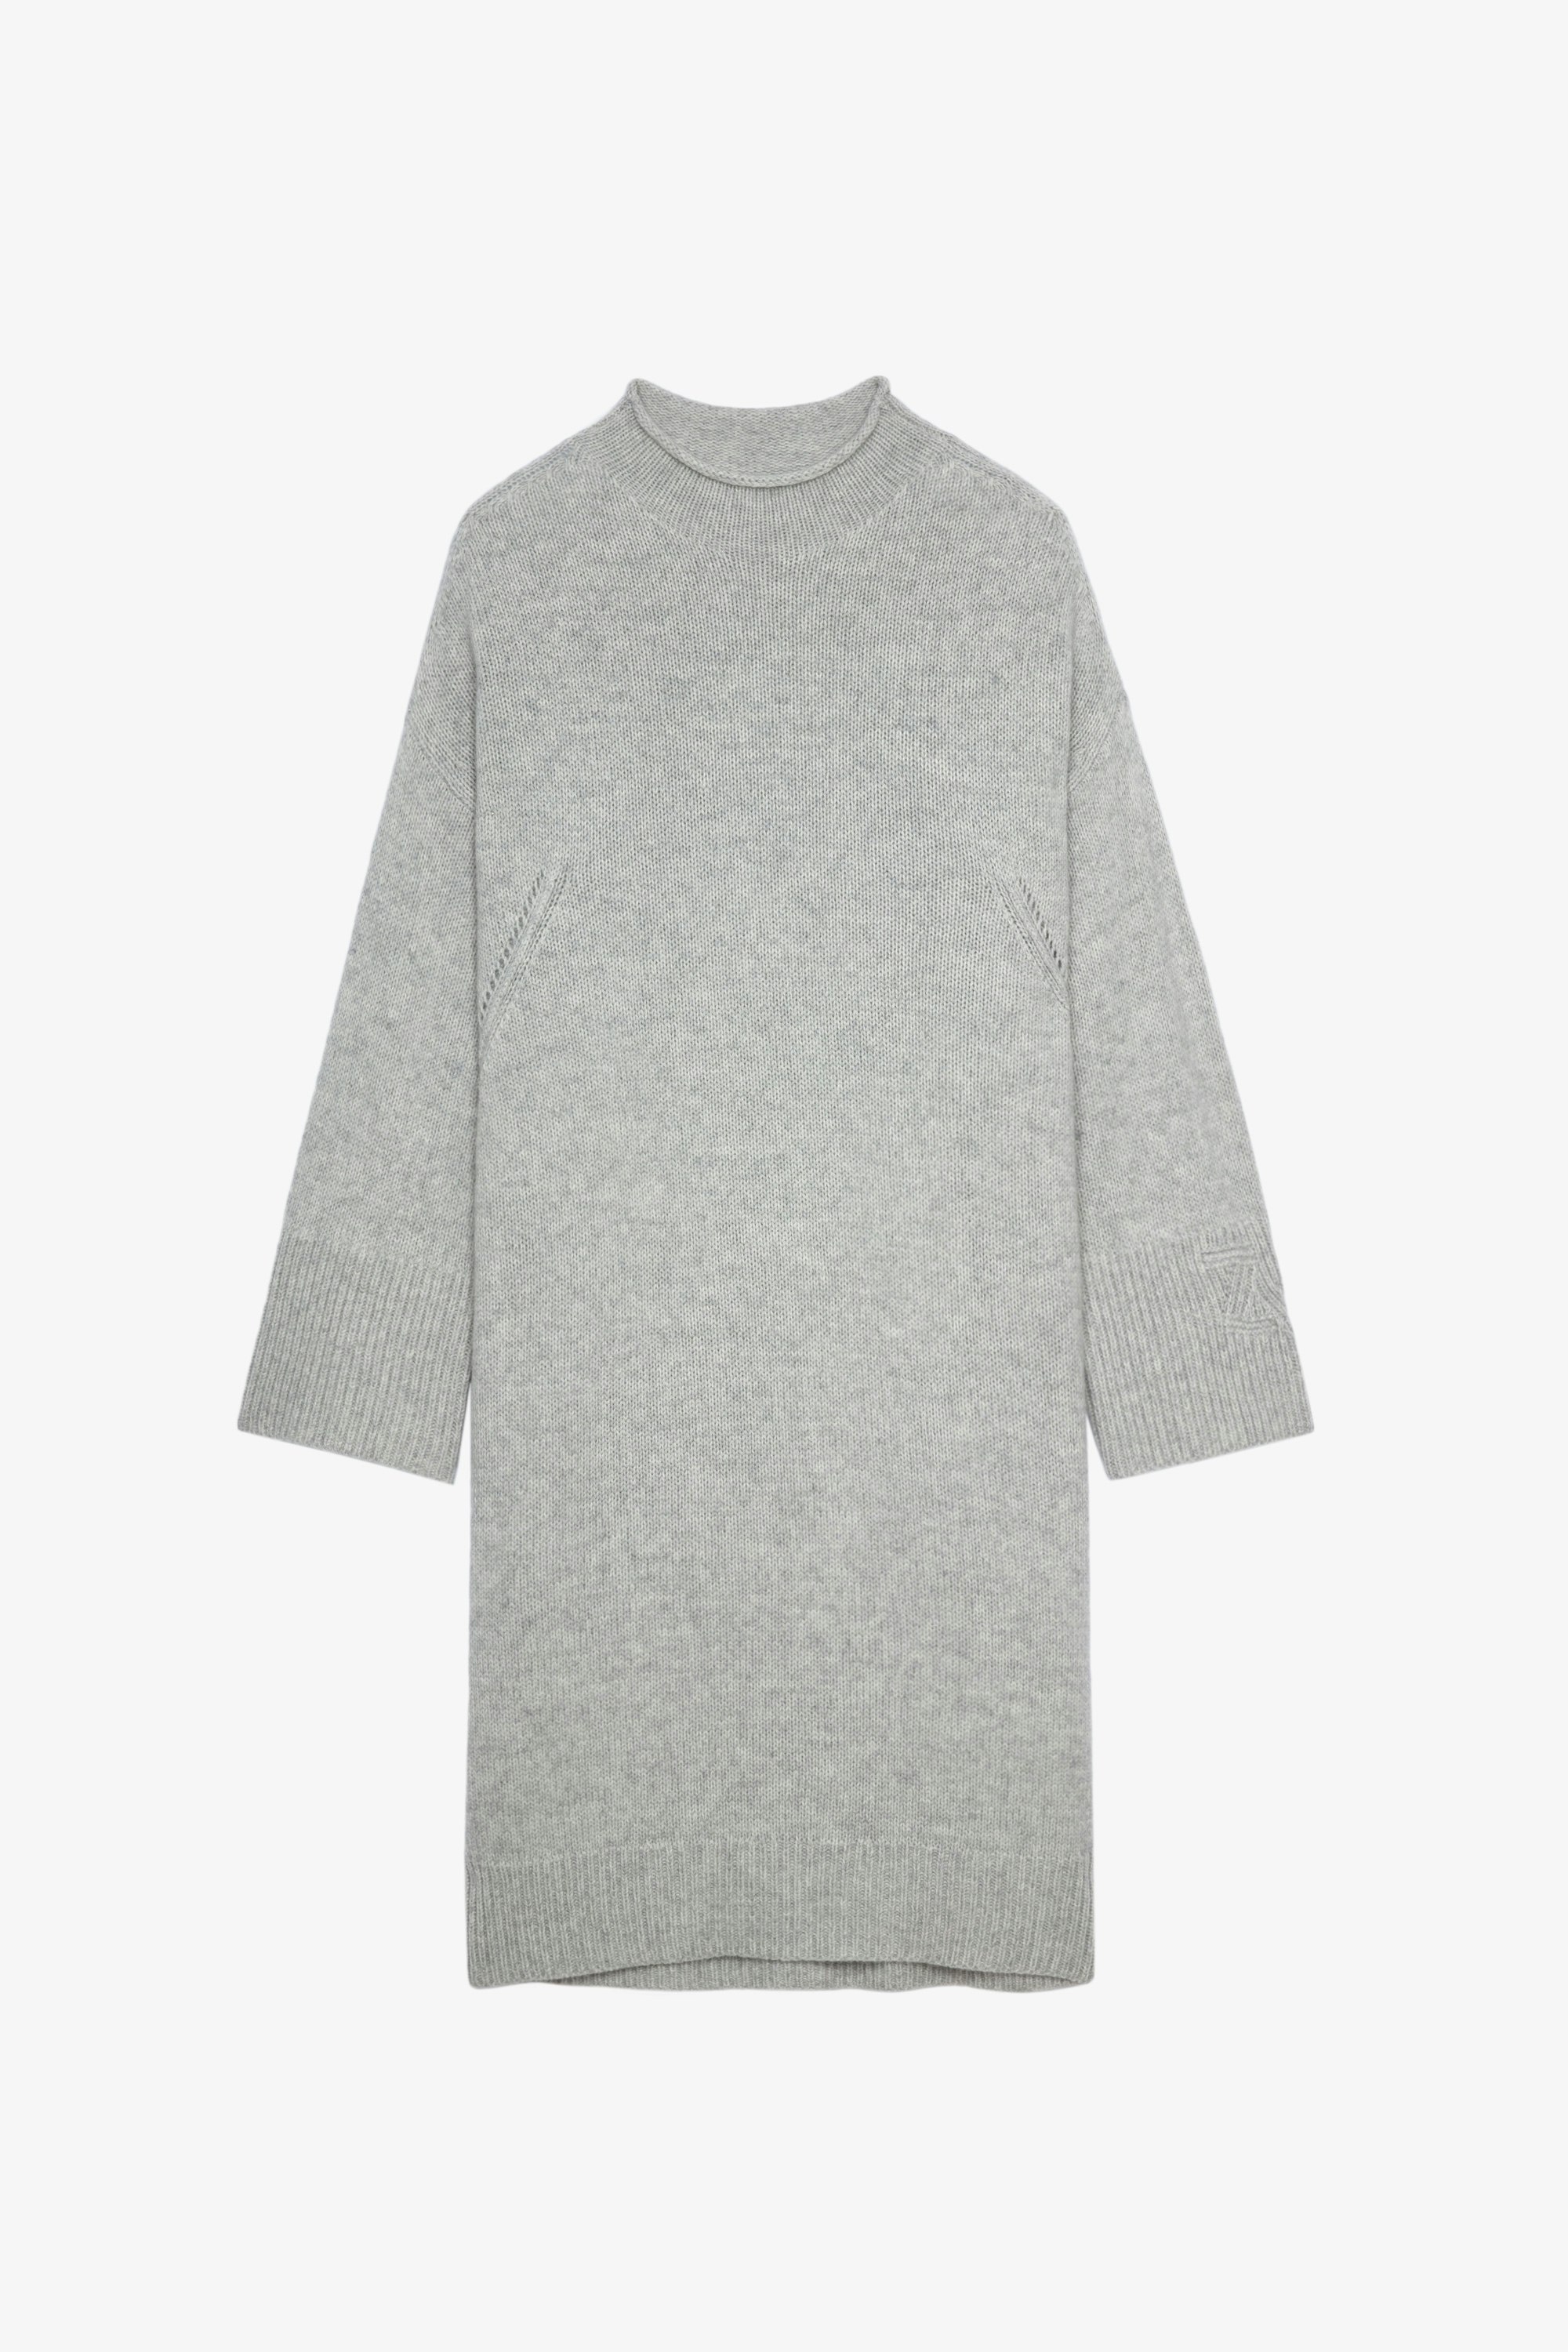 Selena ドレス Oversized grey marl dress with round neckline and long sleeves 